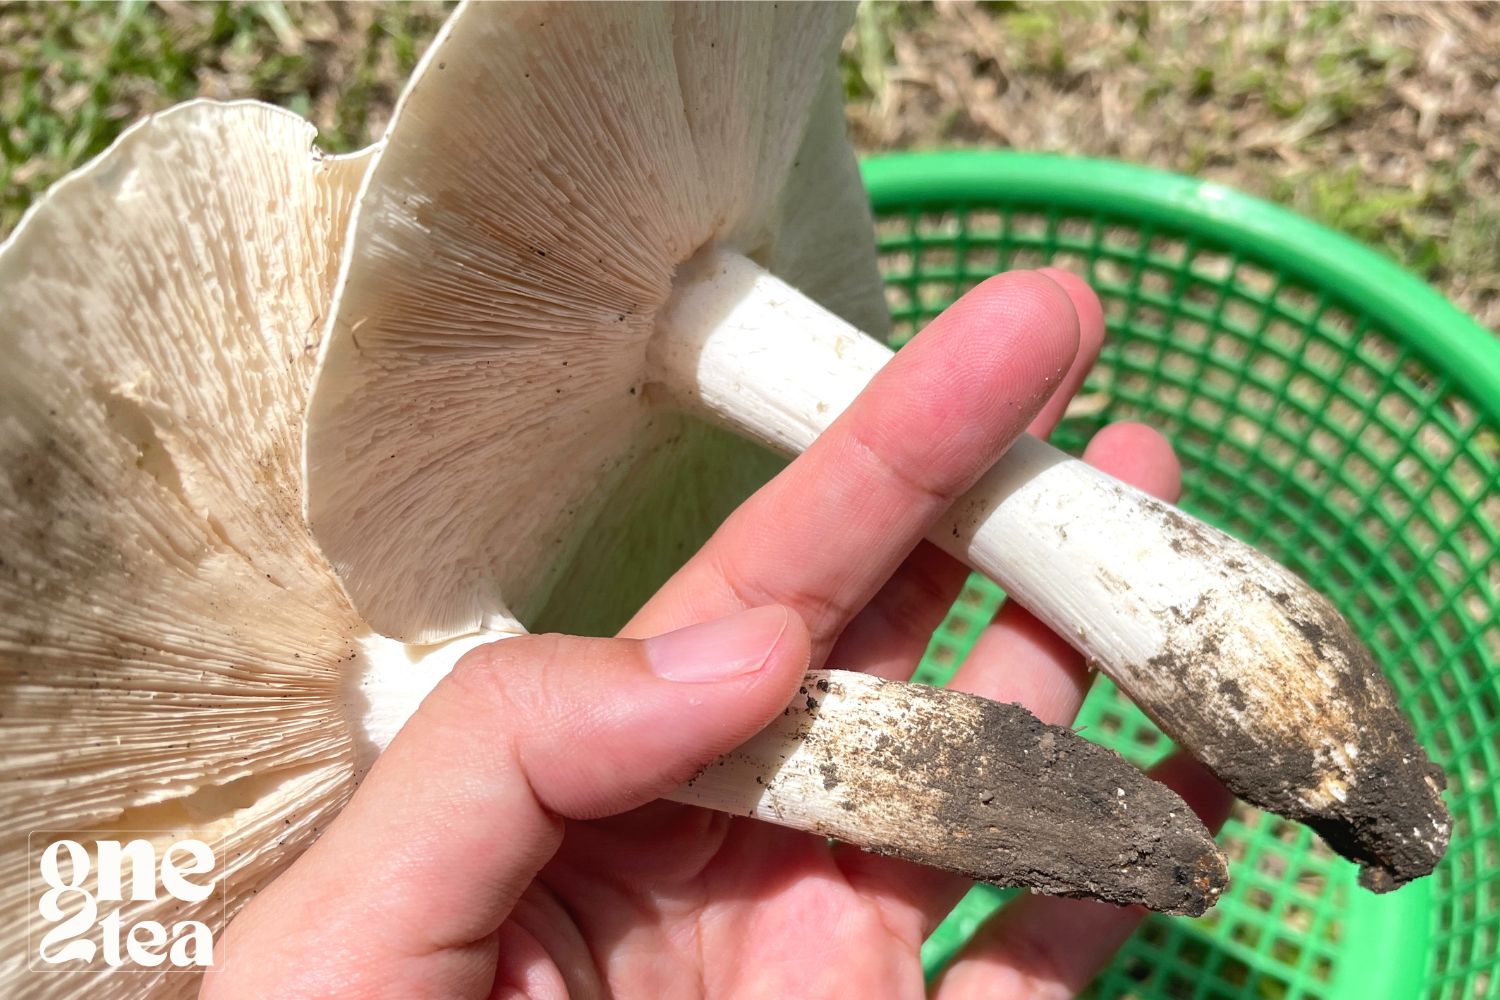 Mushrooms, their benefits, what foods can you cook with mushrooms?